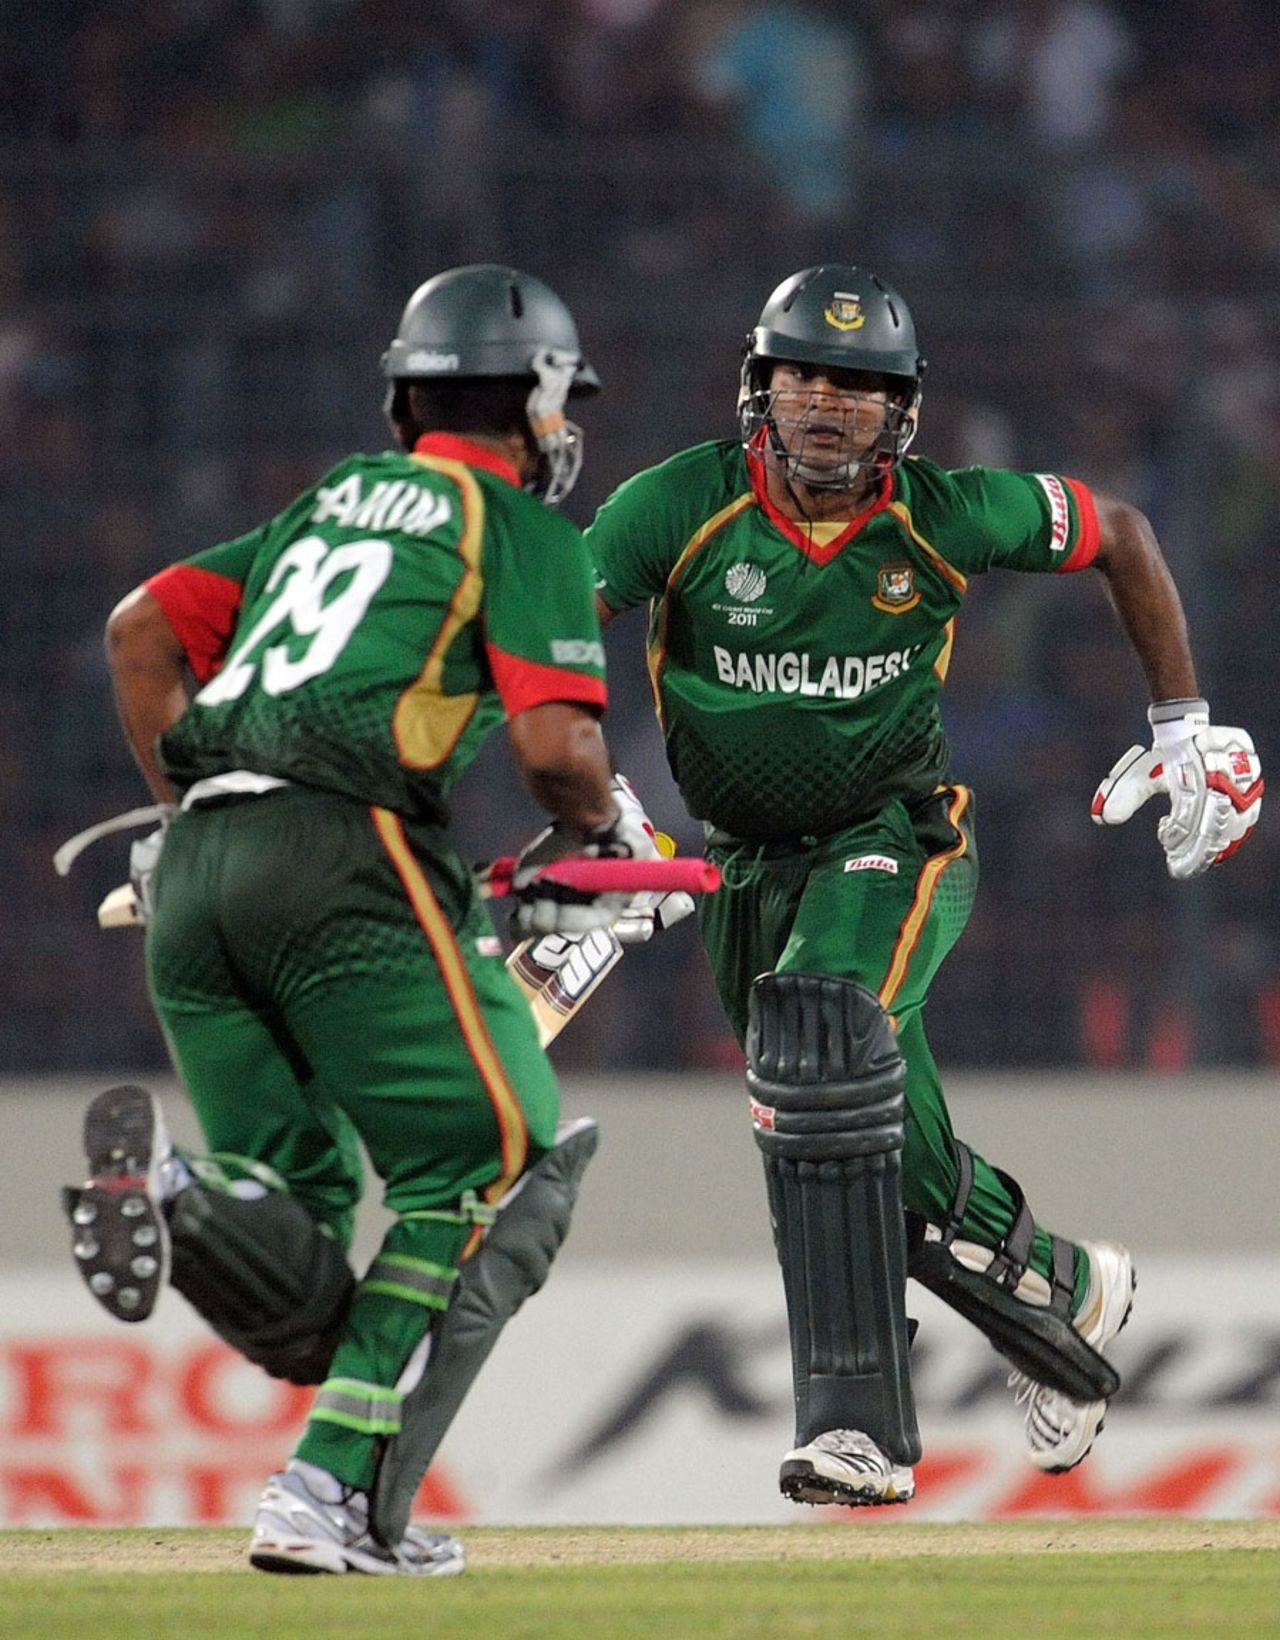 Tamim Iqbal and Junaid Siddique put together a steady partnership for the second wicket, Bangladesh v India, Group B, World Cup 2011, Mirpur, February 19, 2011